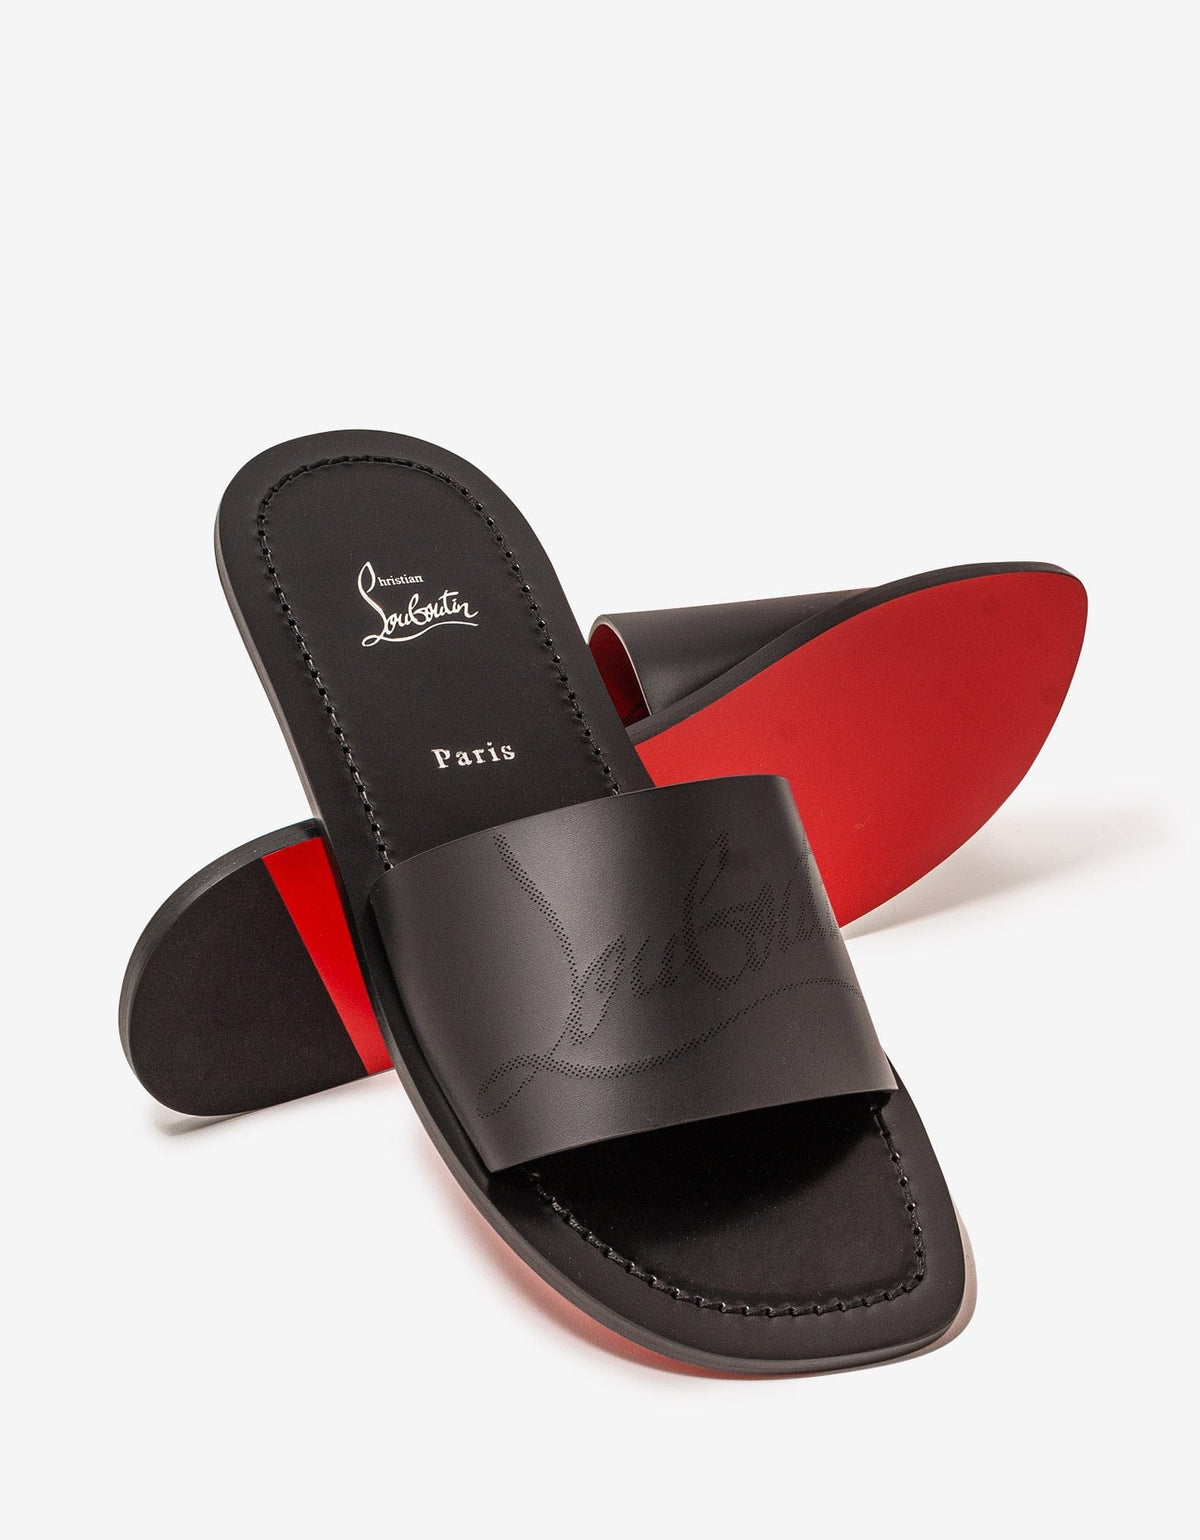 Christian Louboutin Coolraoul Black Leather Slide Sandals -